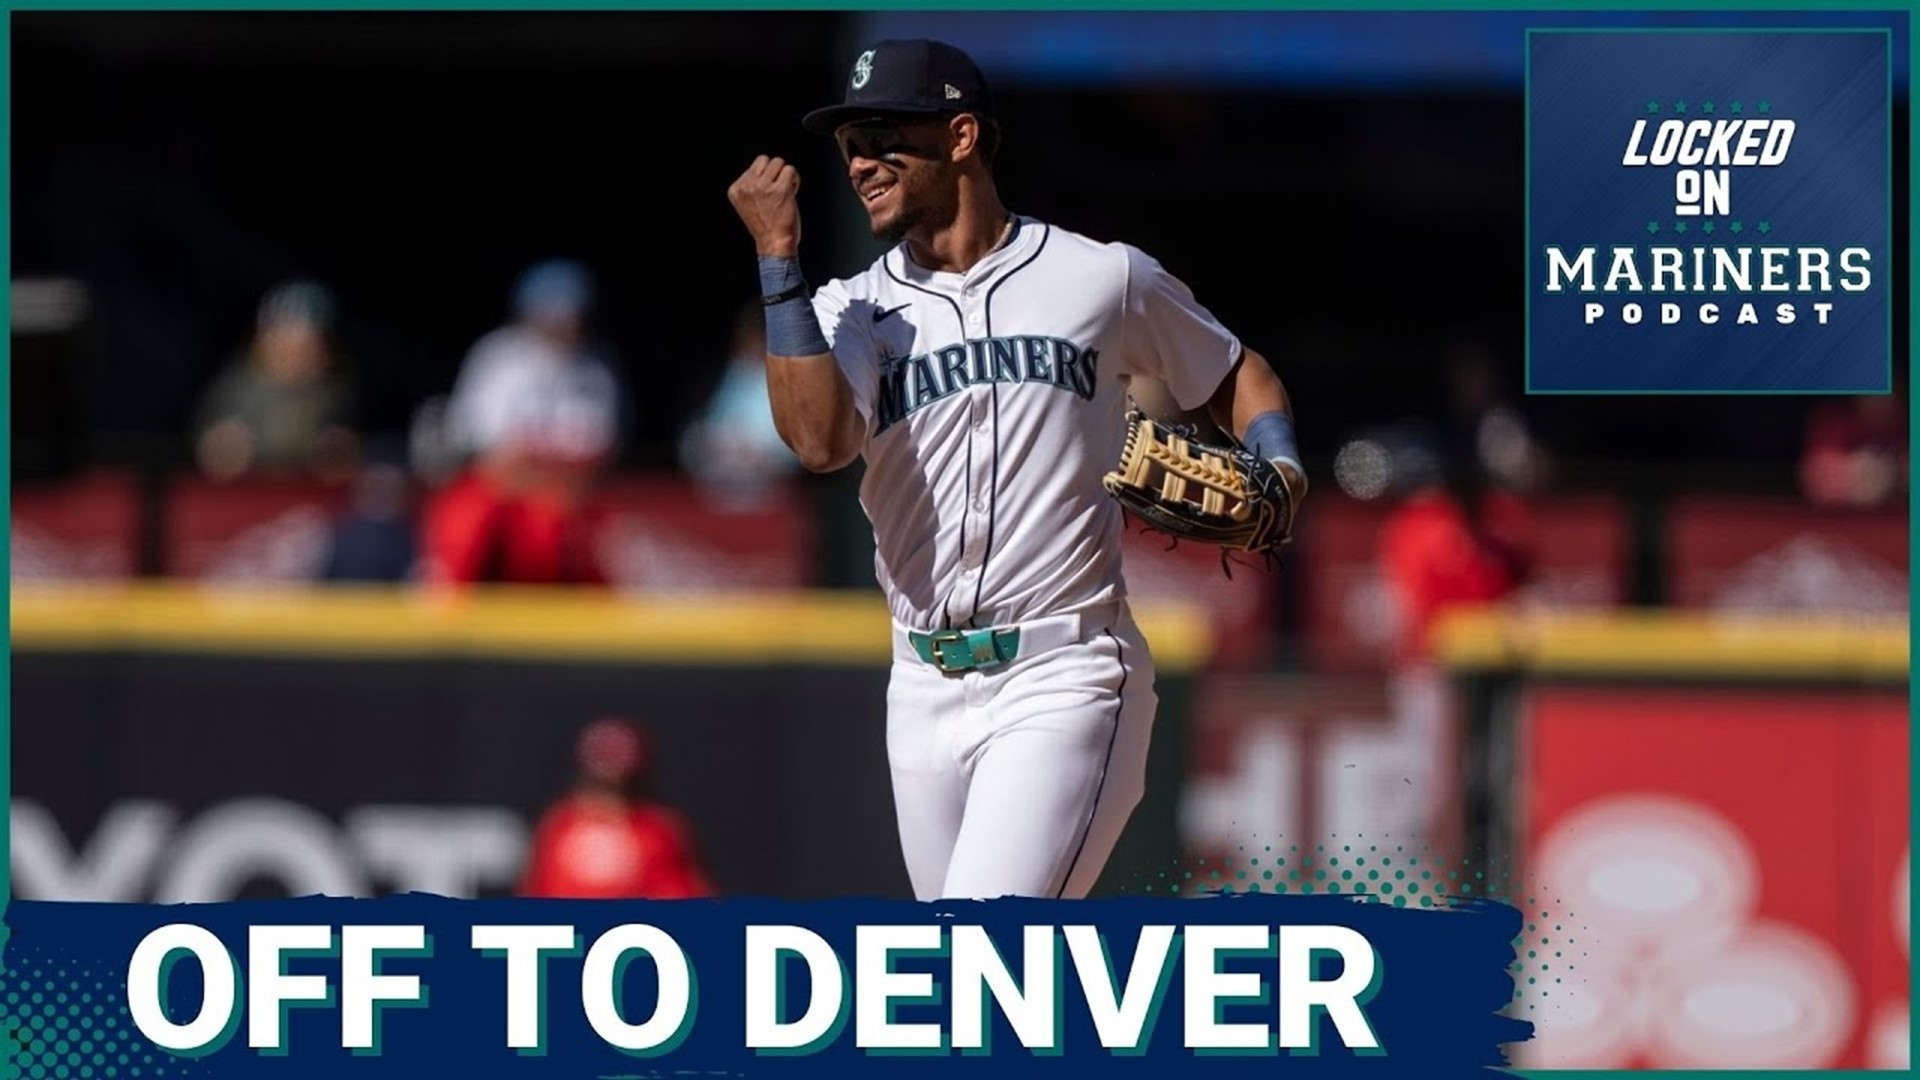 The Mariners are off on their second road trip of the season, looking to pick up where they left off against the Reds.